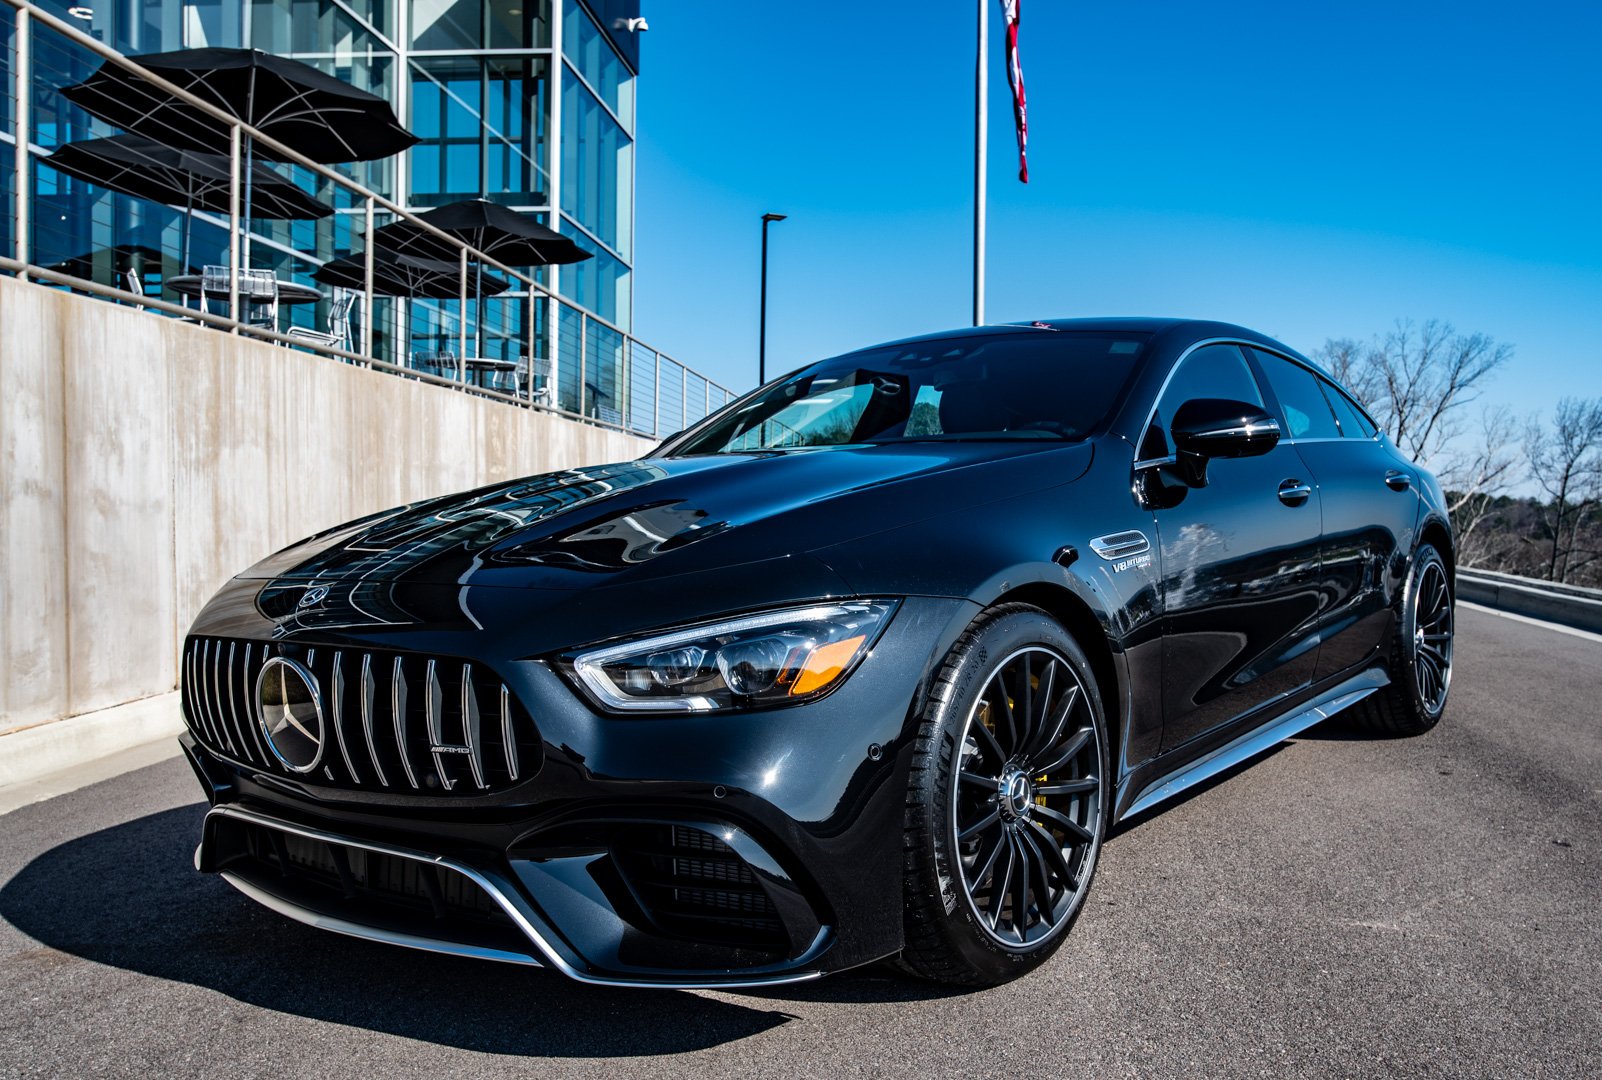 New 2020 Mercedes Benz GT AMG 174 GT 63 S 4MATIC 174 SEDAN in Irondale 